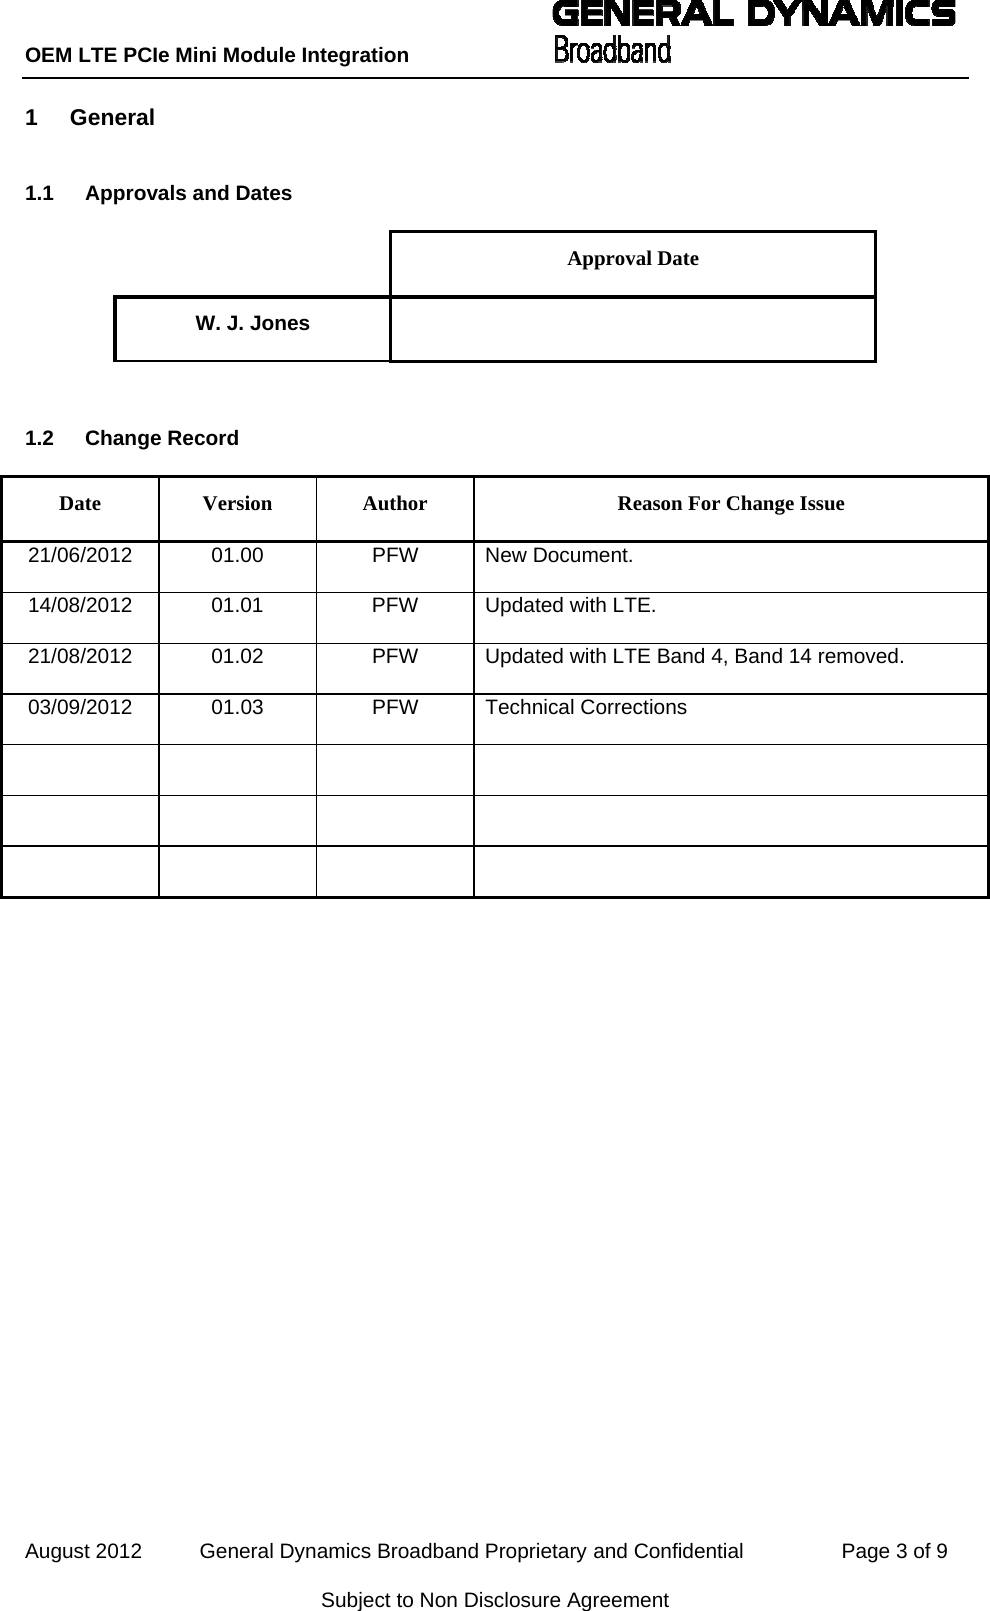 OEM LTE PCIe Mini Module Integration           August 2012          General Dynamics Broadband Proprietary and Confidential                 Page 3 of 9 Subject to Non Disclosure Agreement 1  General   1.1  Approvals and Dates  Approval Date W. J. Jones    1.2 Change Record Date  Version  Author  Reason For Change Issue 21/06/2012 01.00  PFW New Document. 14/08/2012  01.01  PFW  Updated with LTE. 21/08/2012  01.02  PFW  Updated with LTE Band 4, Band 14 removed. 03/09/2012 01.03  PFW Technical Corrections               